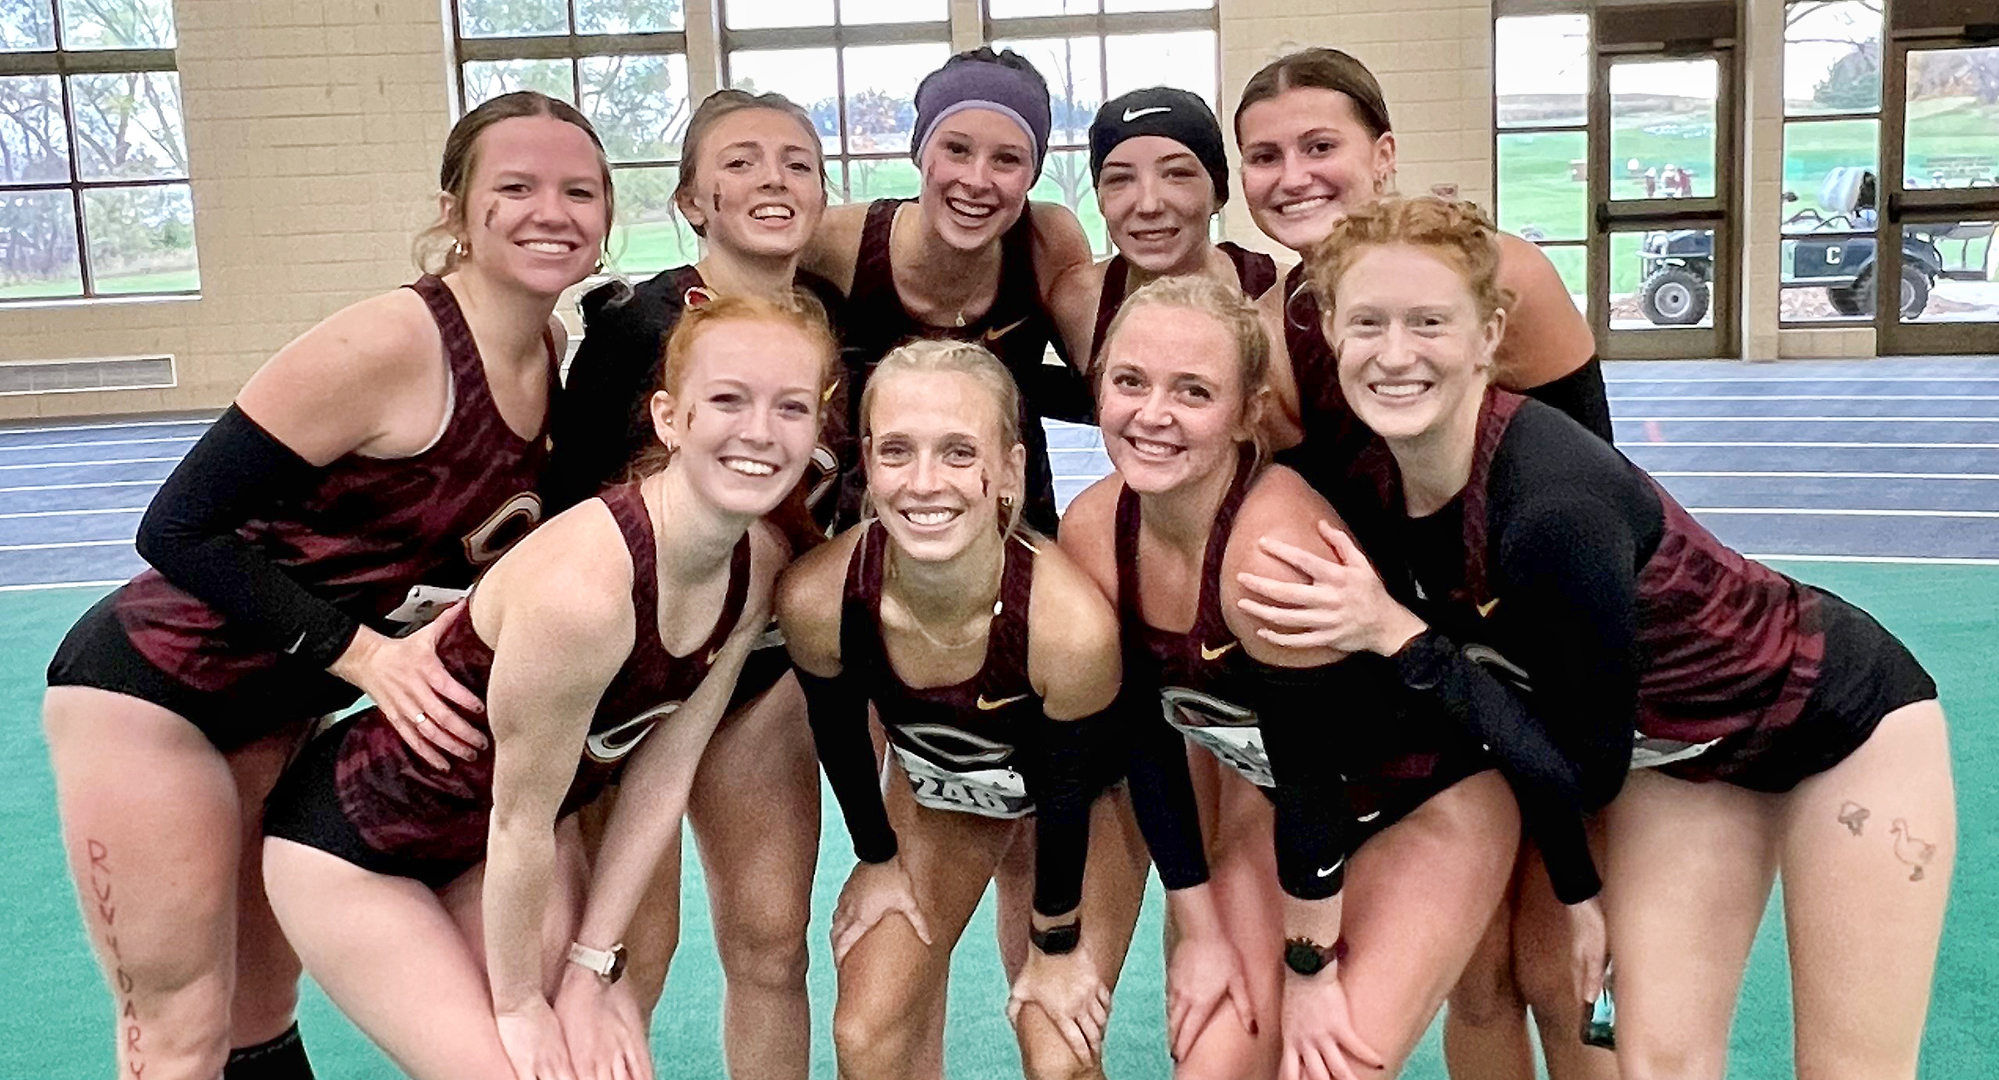 The Cobber crew at the MIAC Meet poses for a picture. They had five runners finish in the Top 58 with all five finishing within 14 seconds of one another.